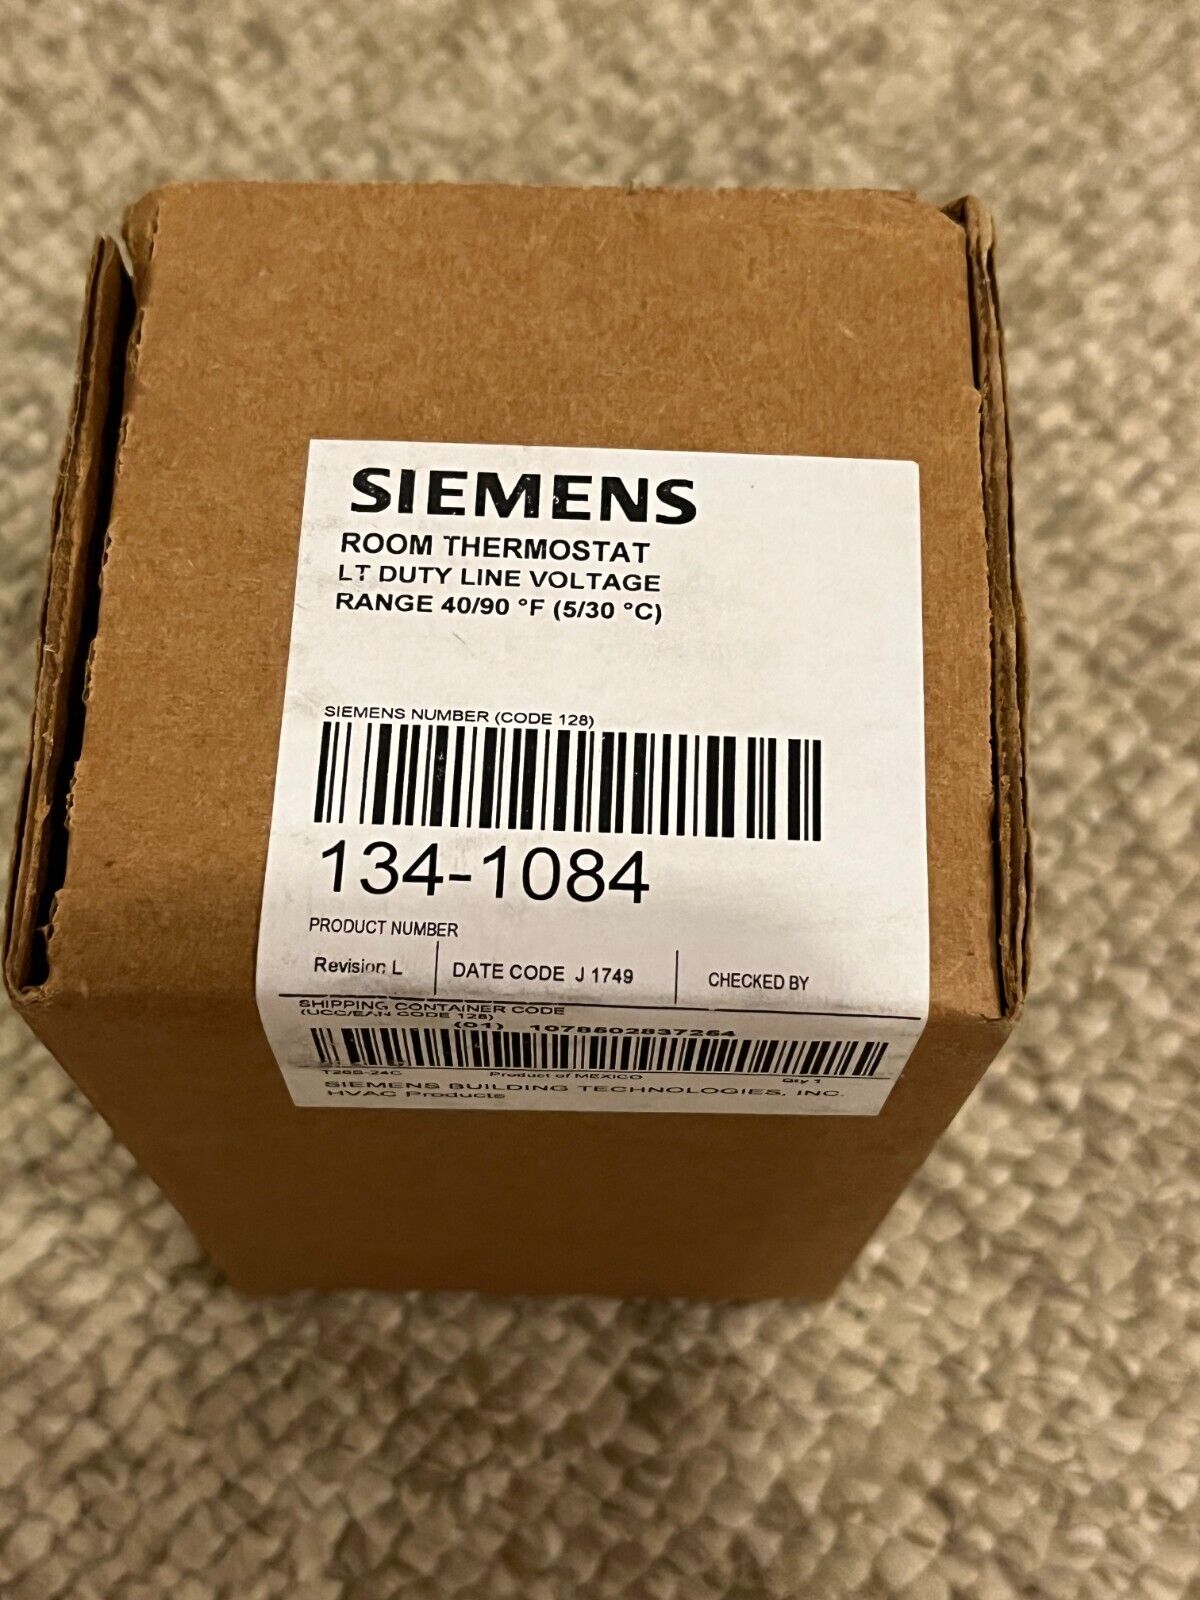 NEW in Box SIEMENS 134-1084 Lt Duty Line Voltage 40/90°F Room Thermostat (HM)